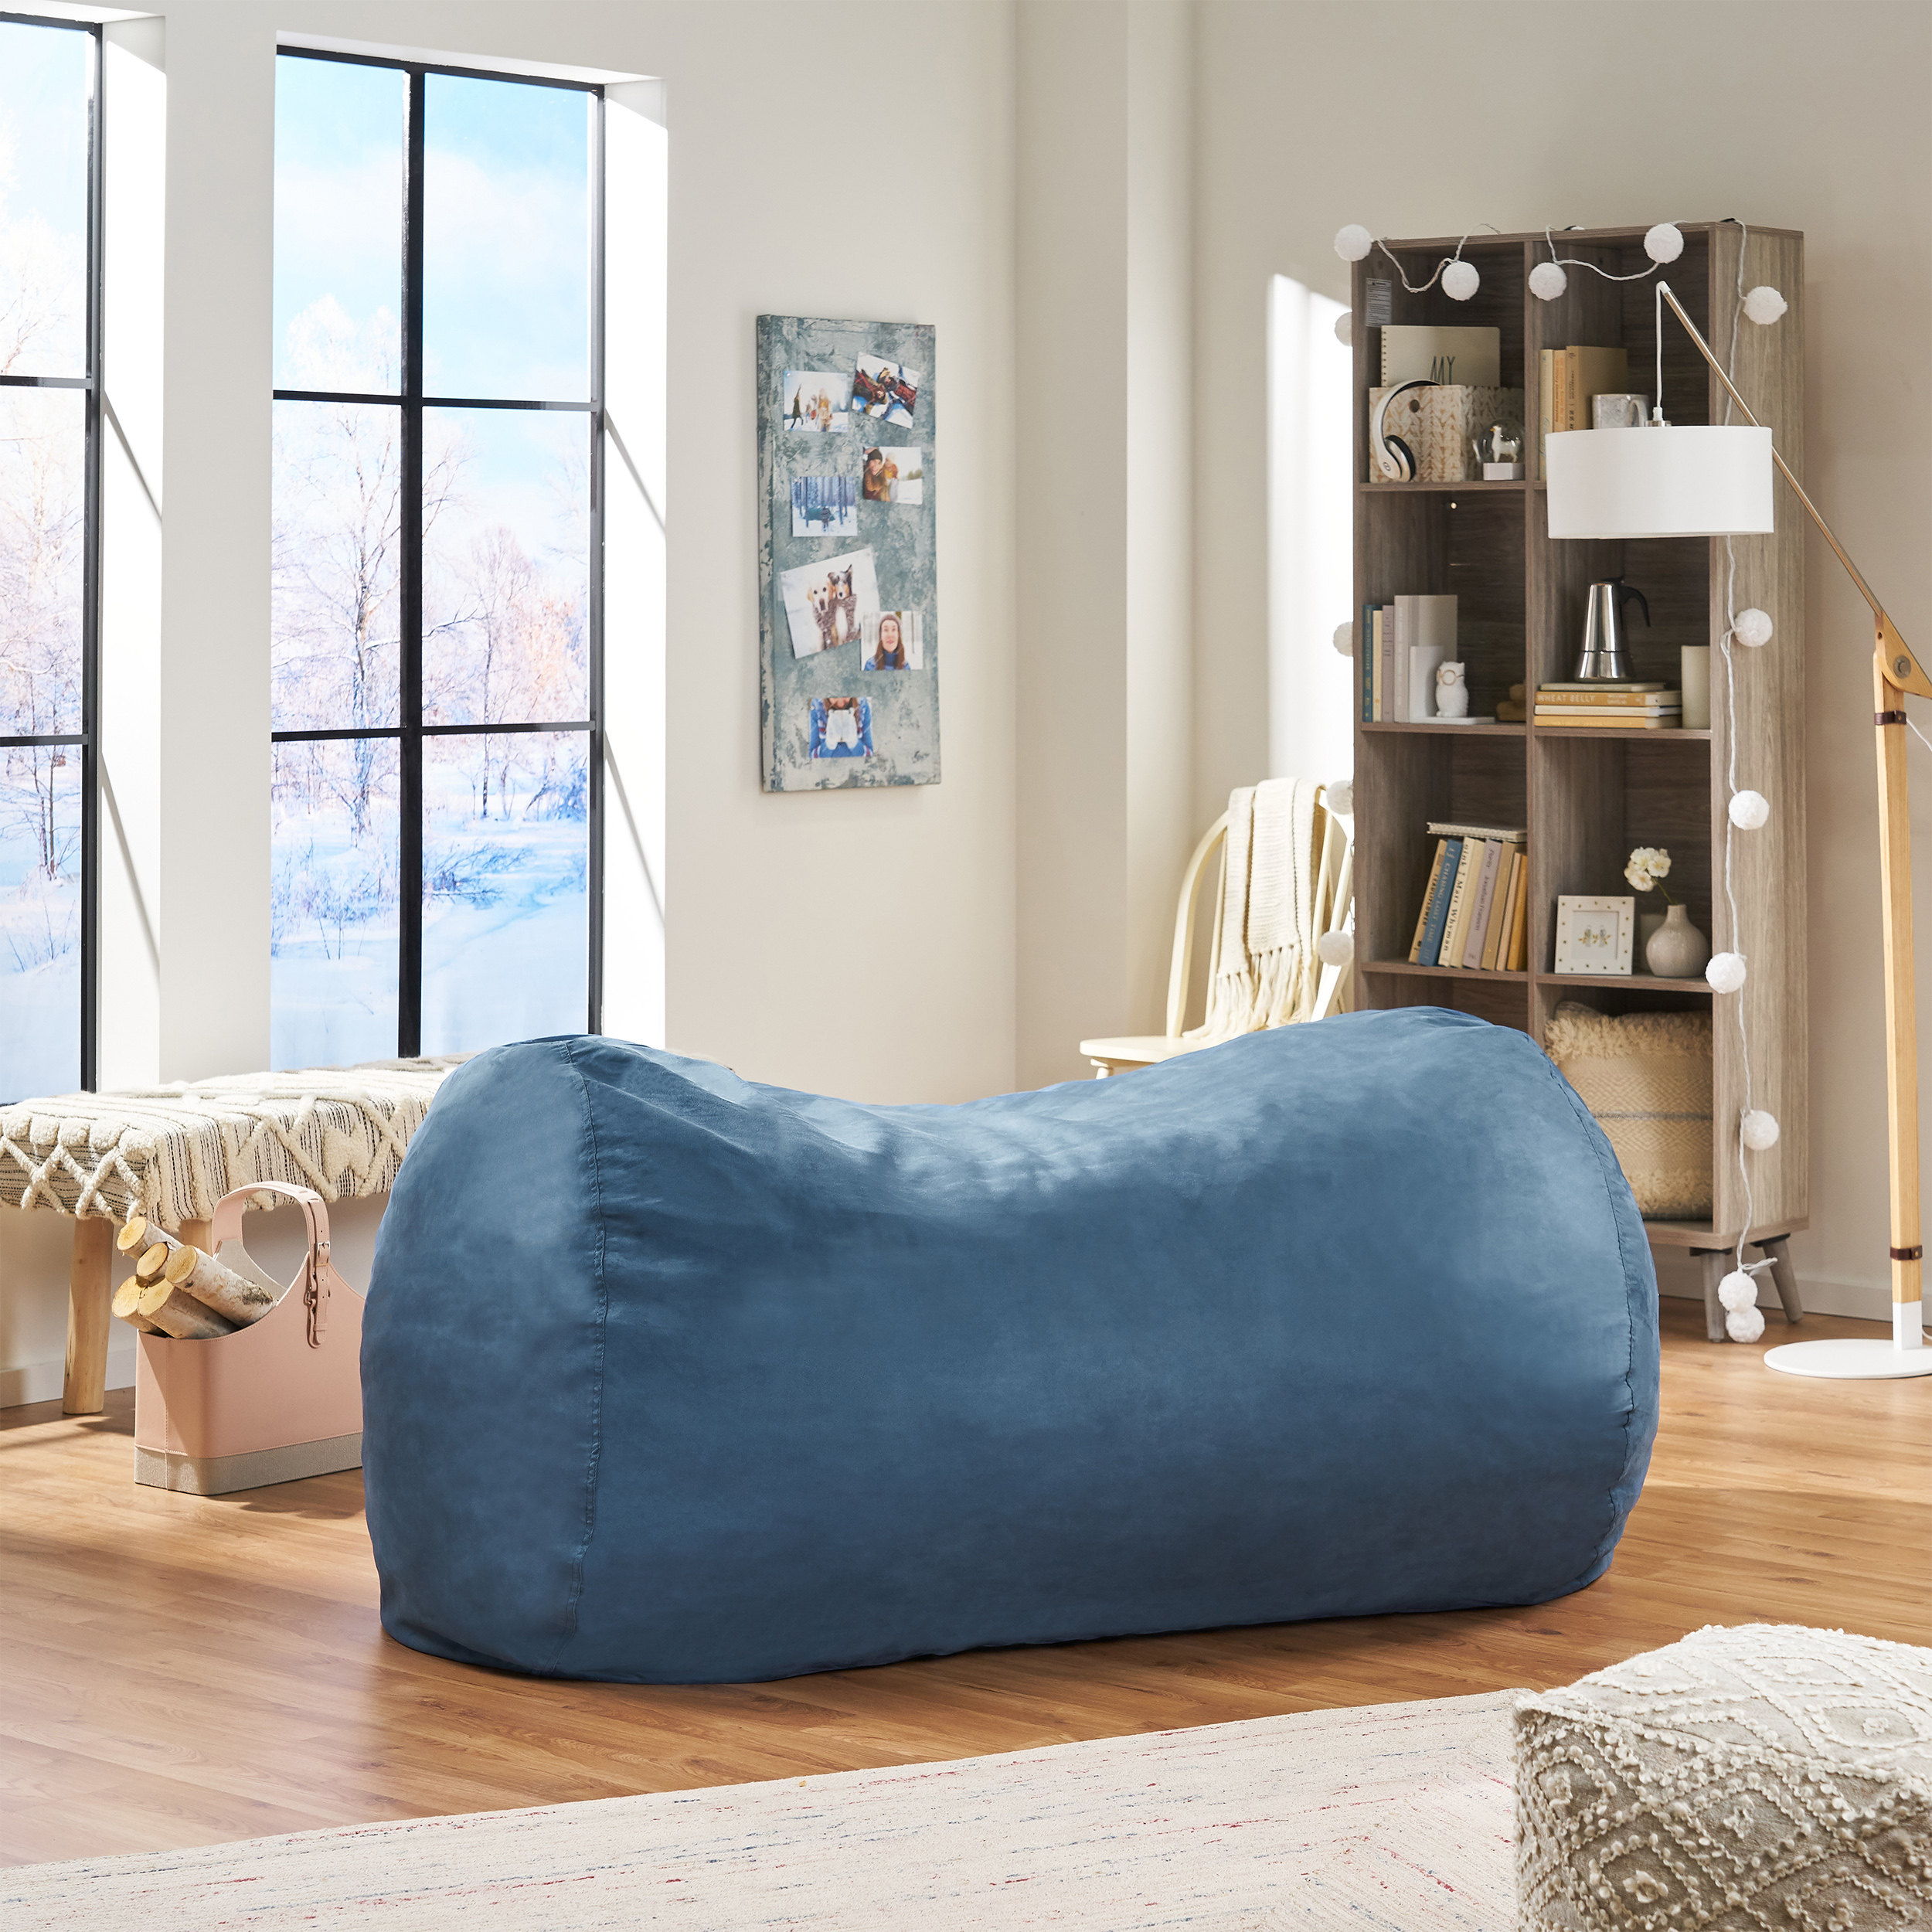 Wanda Traditional 8 Foot Suede Bean Bag (Cover Only), Tuscany - Midnight Blue